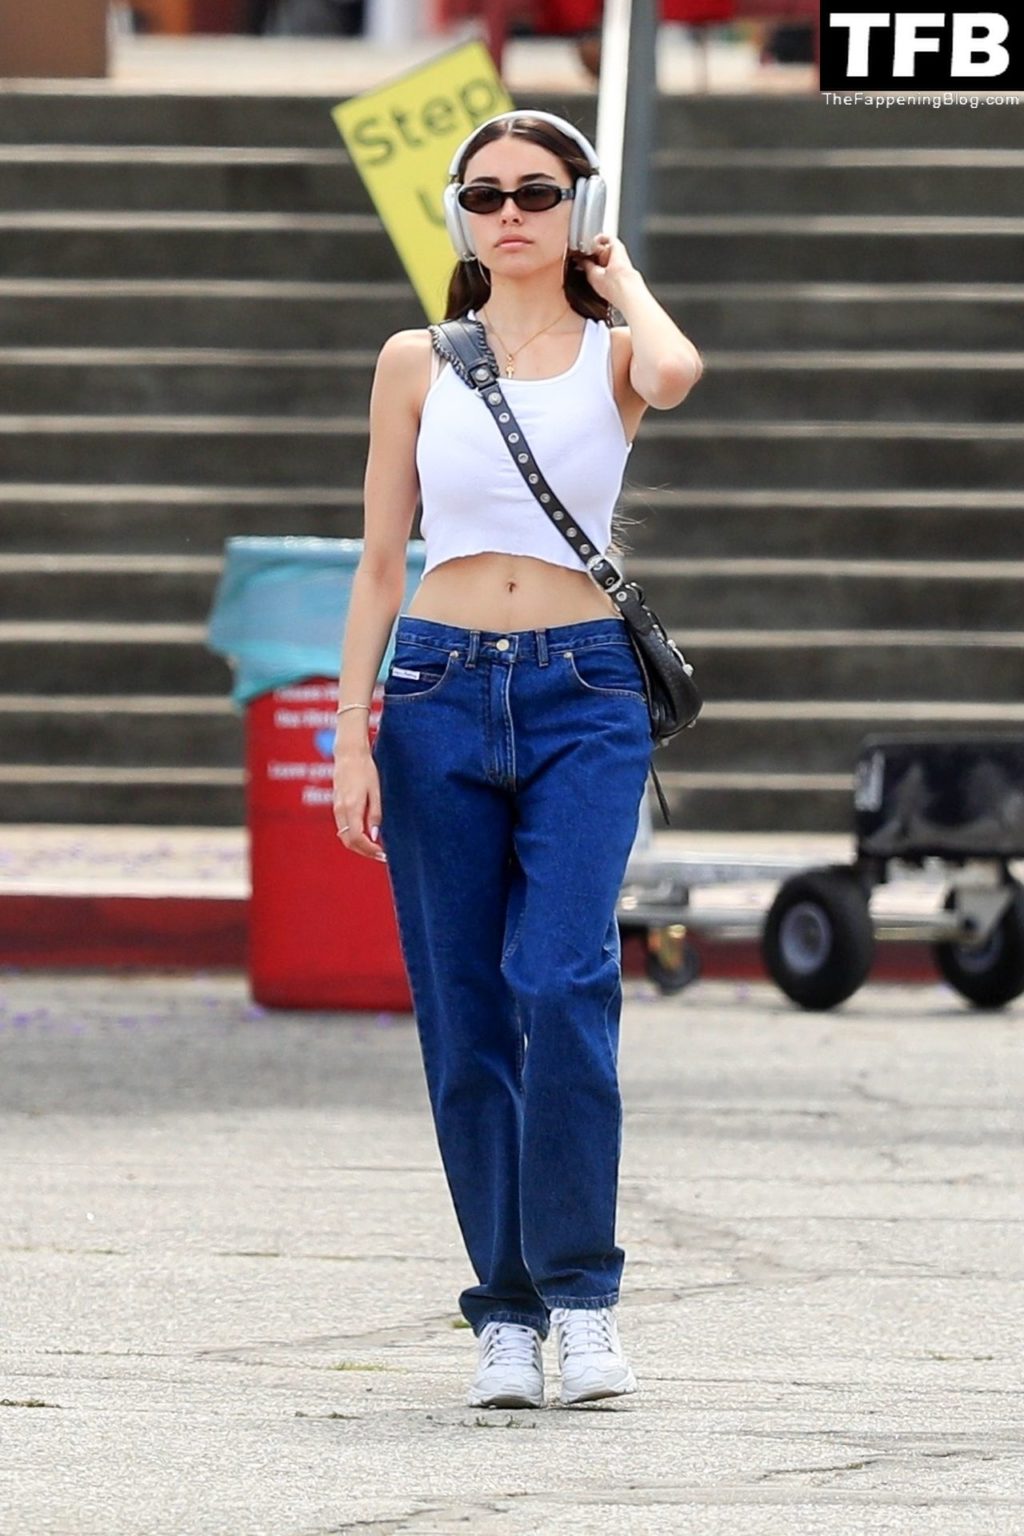 Madison Beer Sexy The Fappening Blog 5 1 1024x1536 - Madison Beer Wears a Tiny Crop Top Revealing a Toned Waist While Shopping in LA (39 Photos)